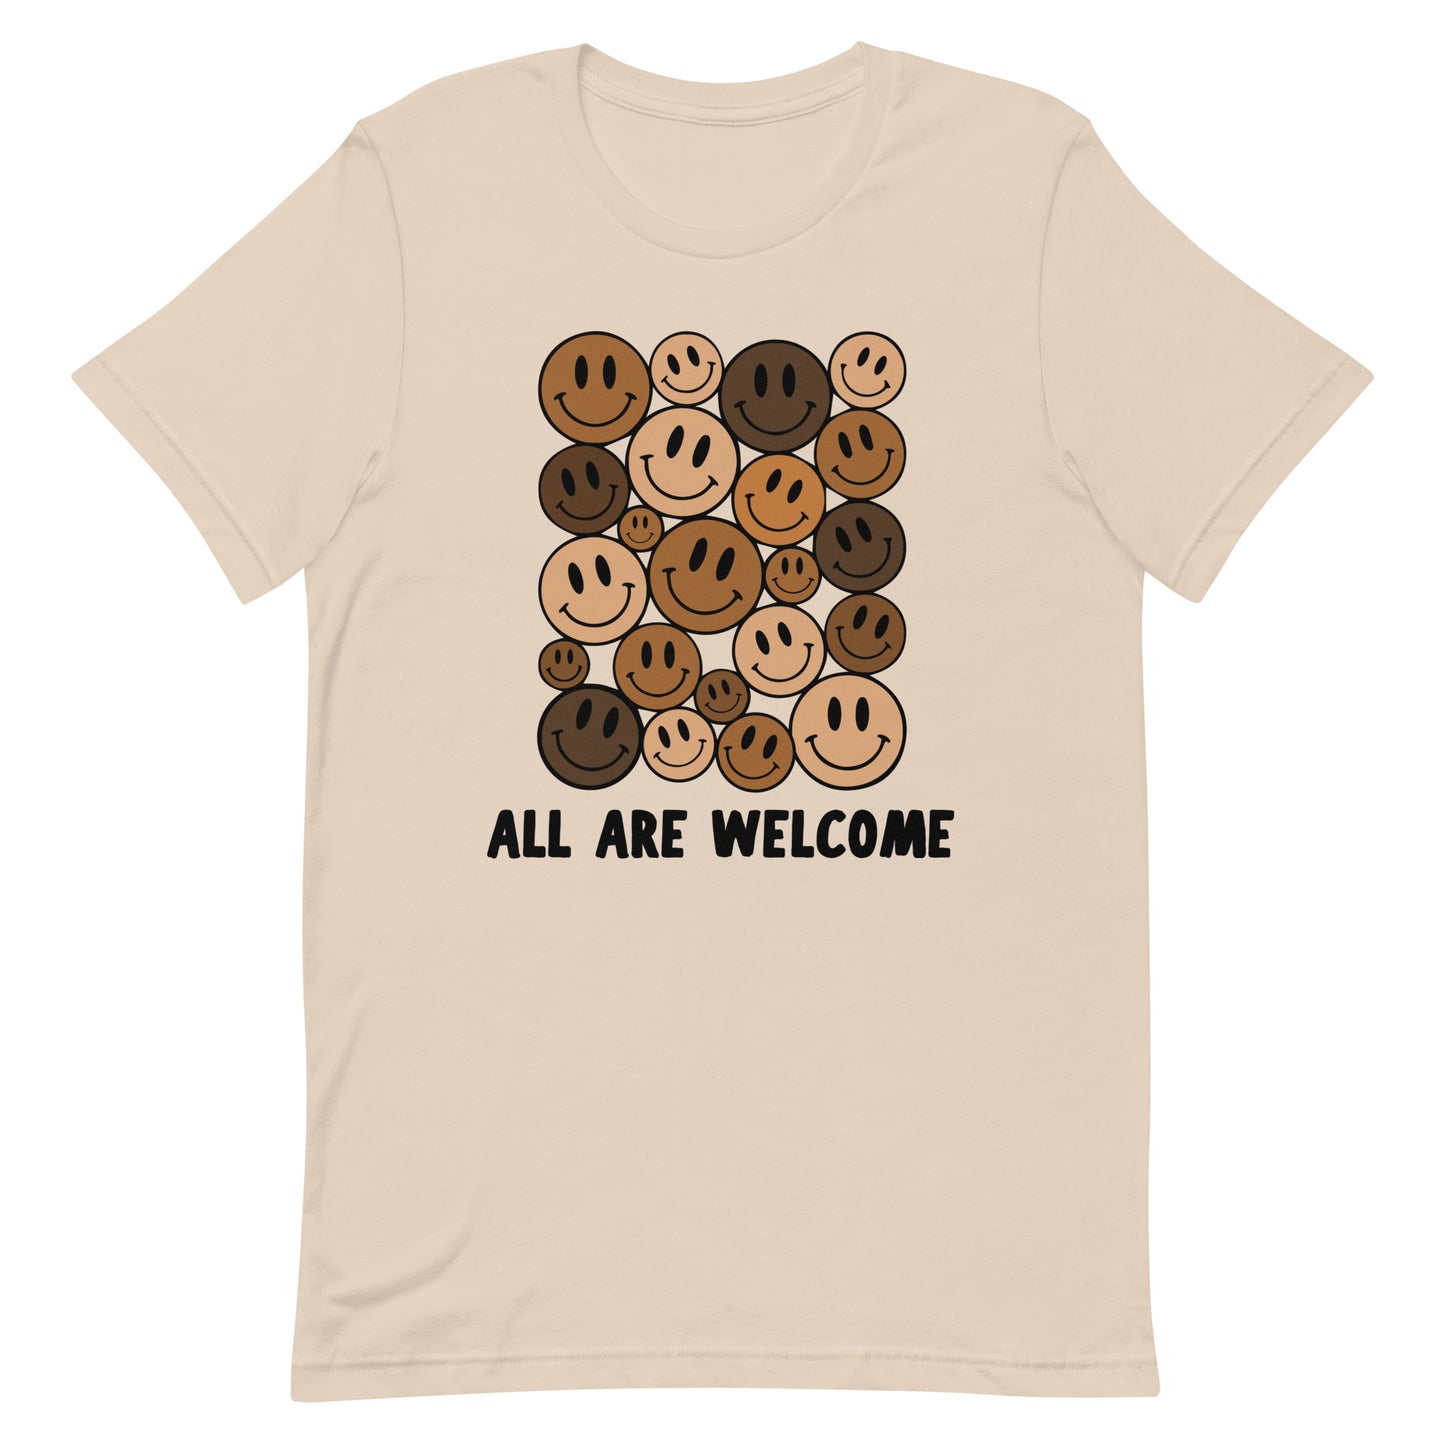 All Are Welcome Tshirt